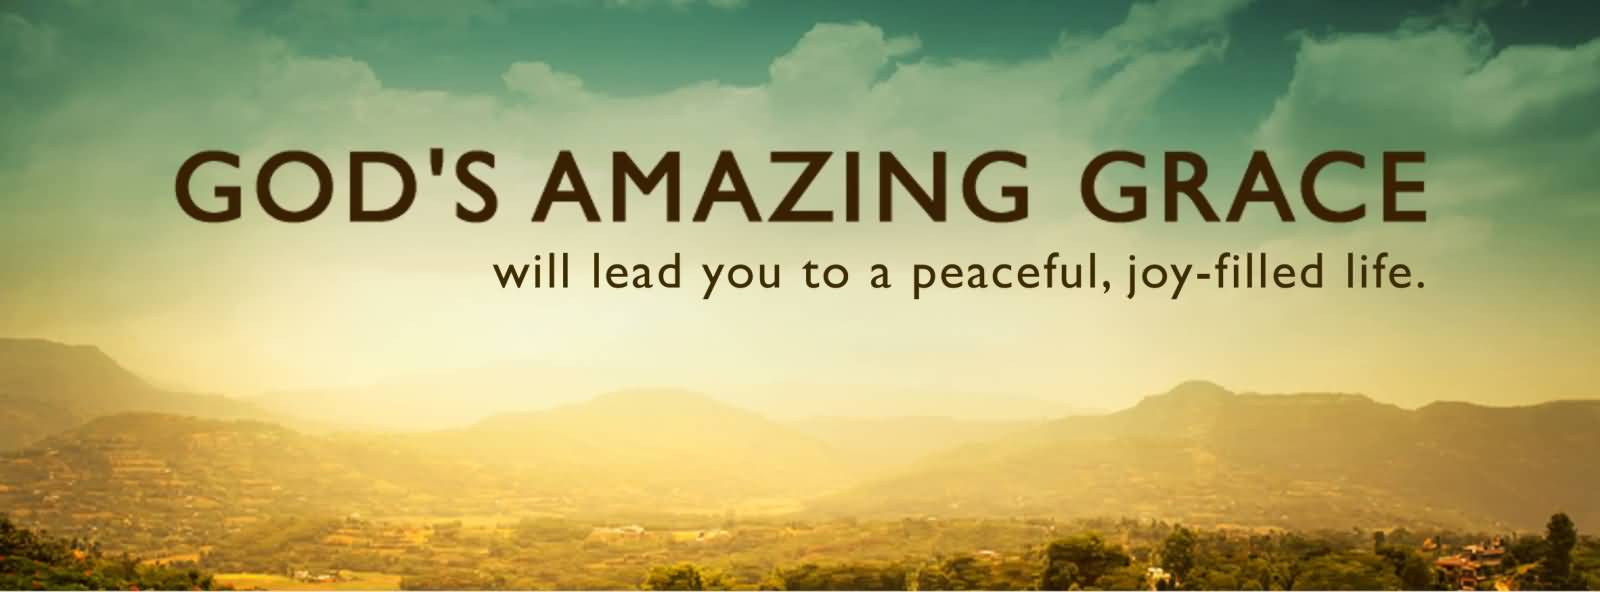 God's amazing grace will lead you to a peaceful, joy-filled life.